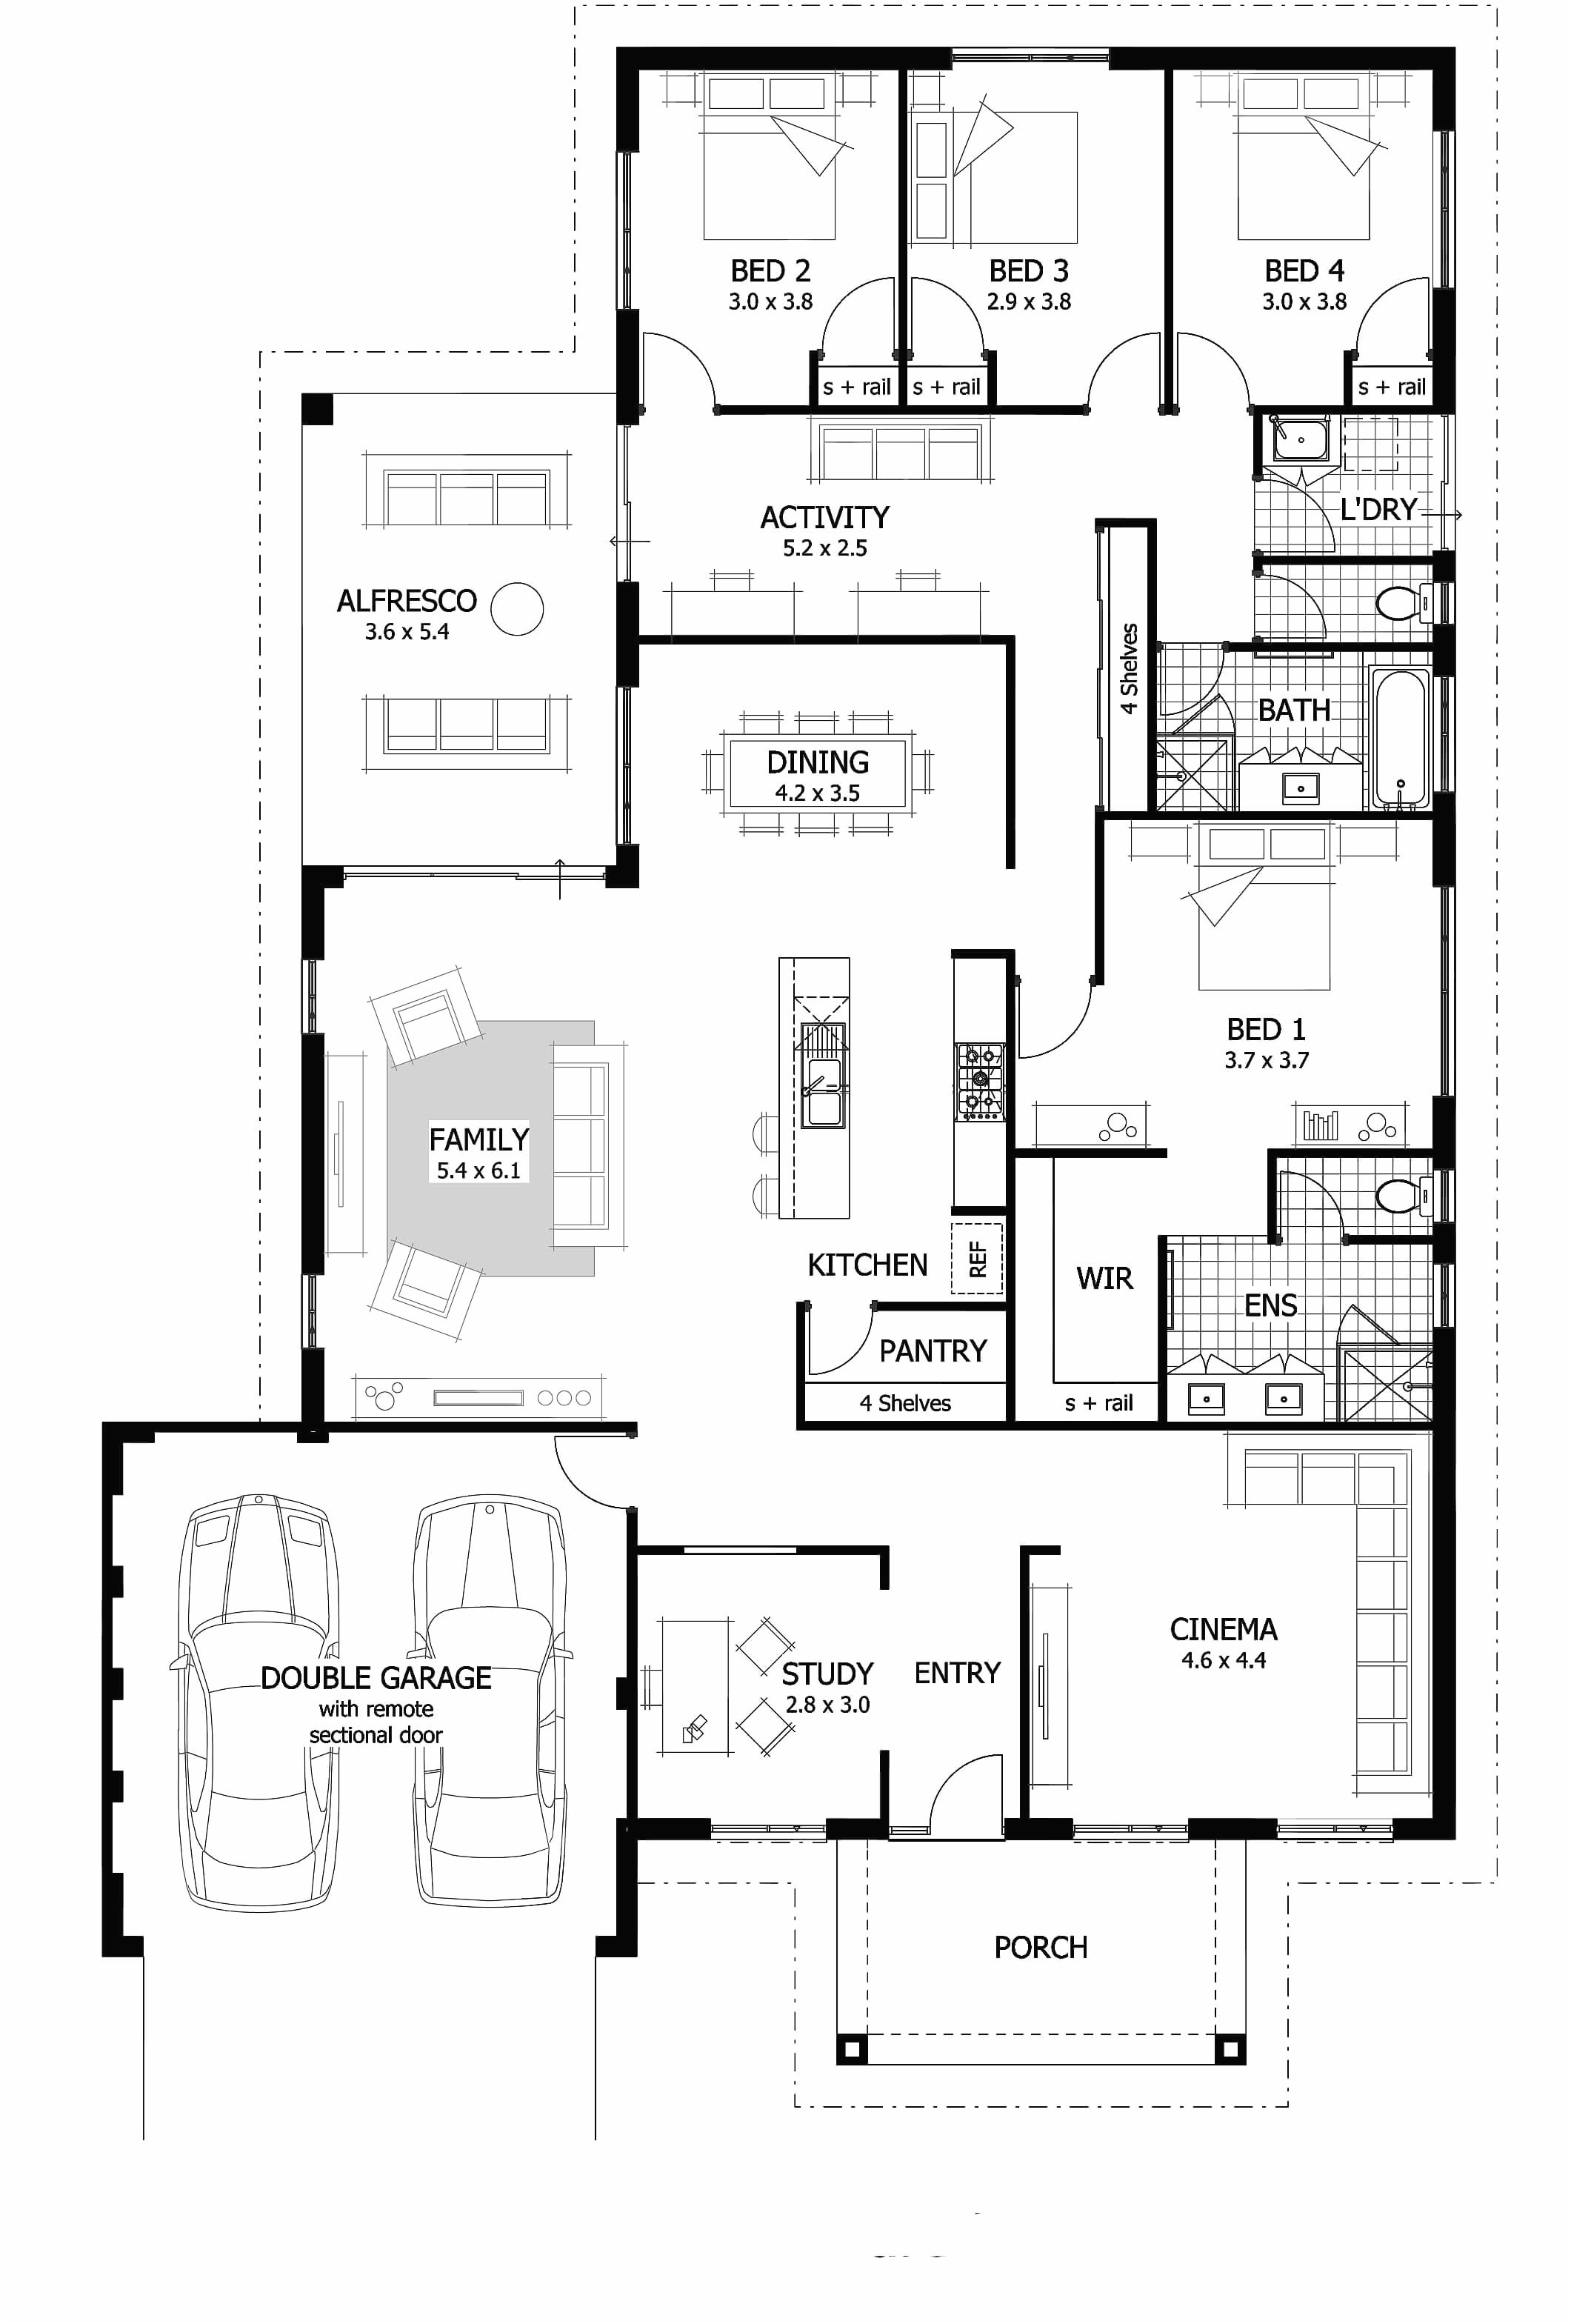 Best Home Floor Plans 2018 Luxury Homes Plans the Best Cliff May Floor Plans Luxury